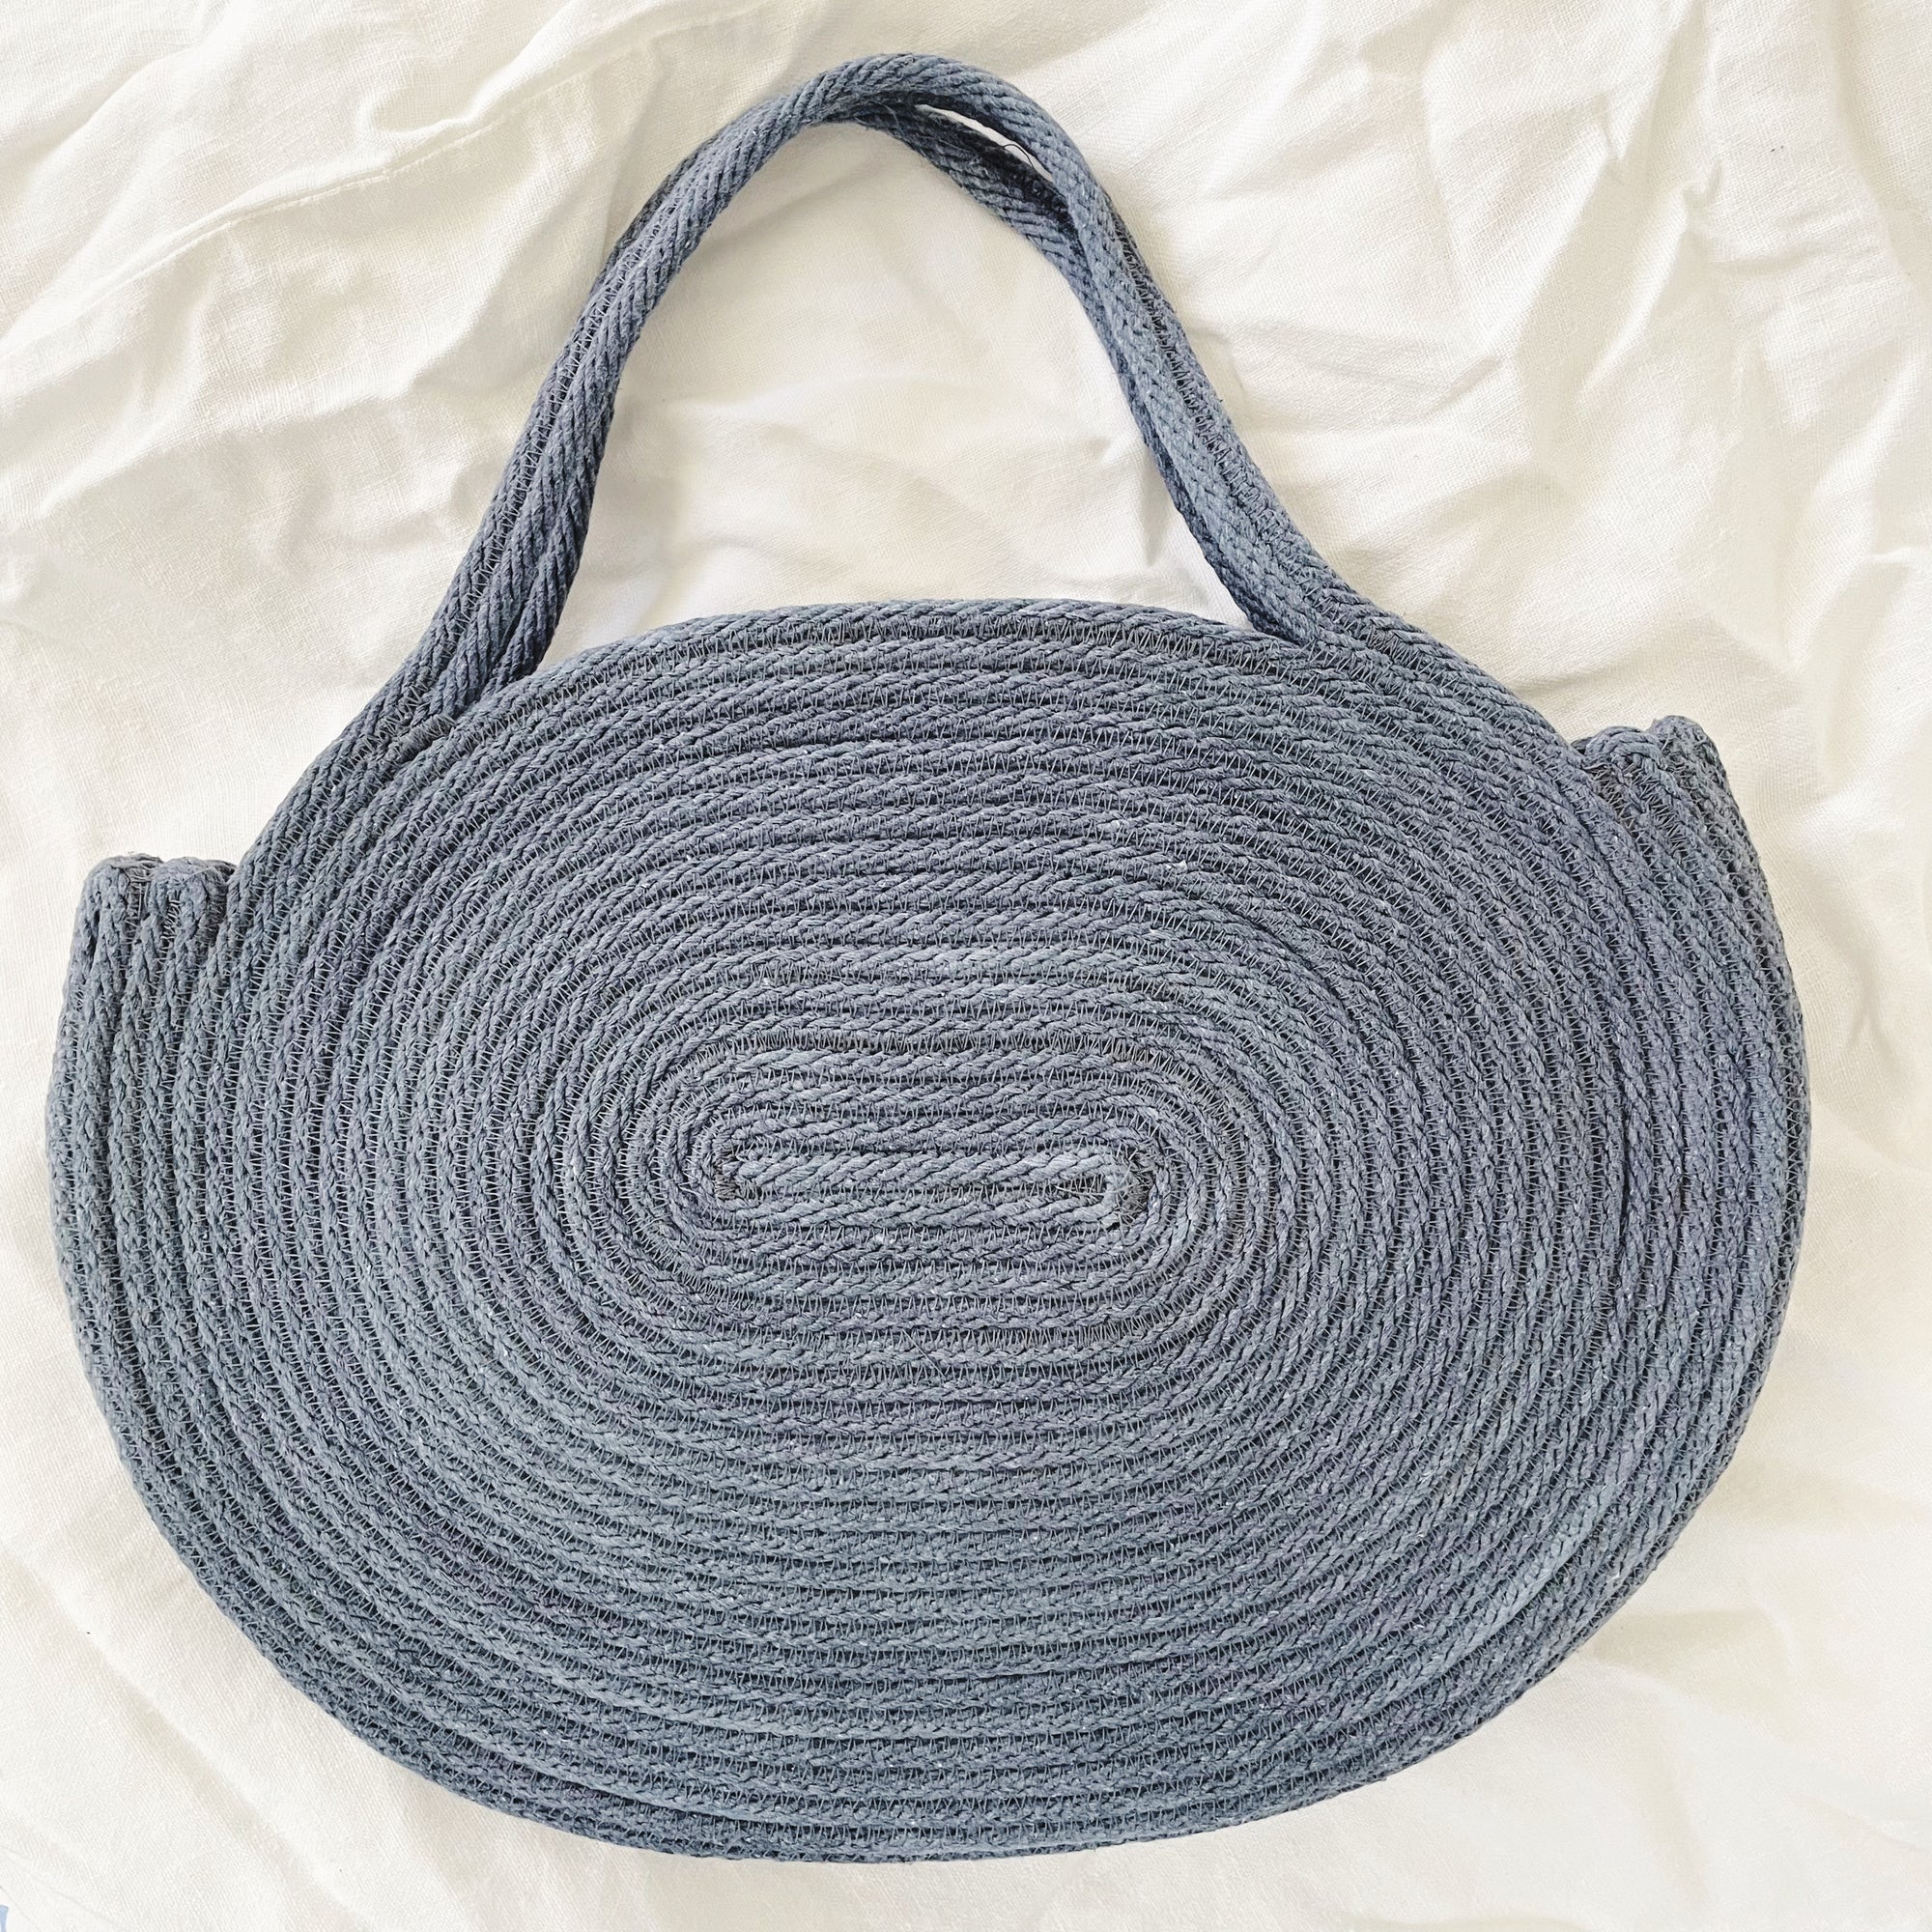 Cotton Rope Totes - Round / Oval